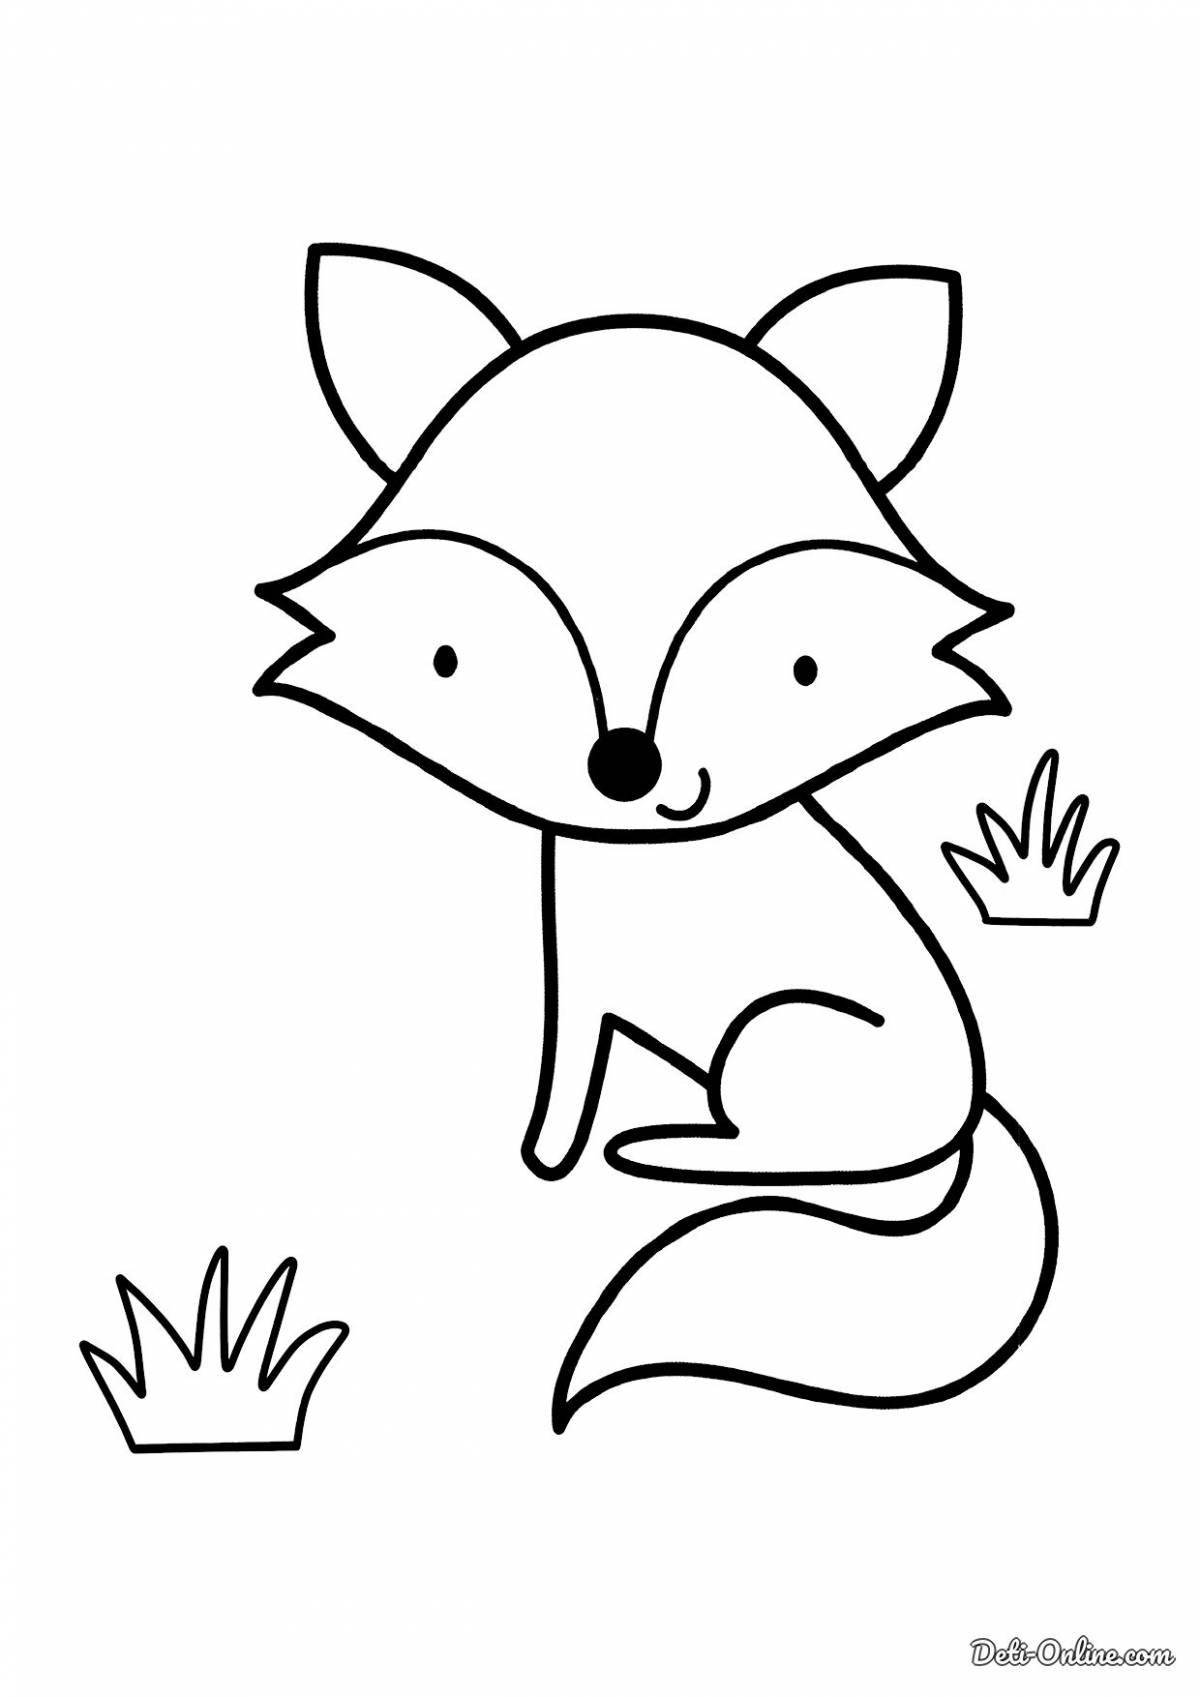 Violent fox coloring for children 3-4 years old